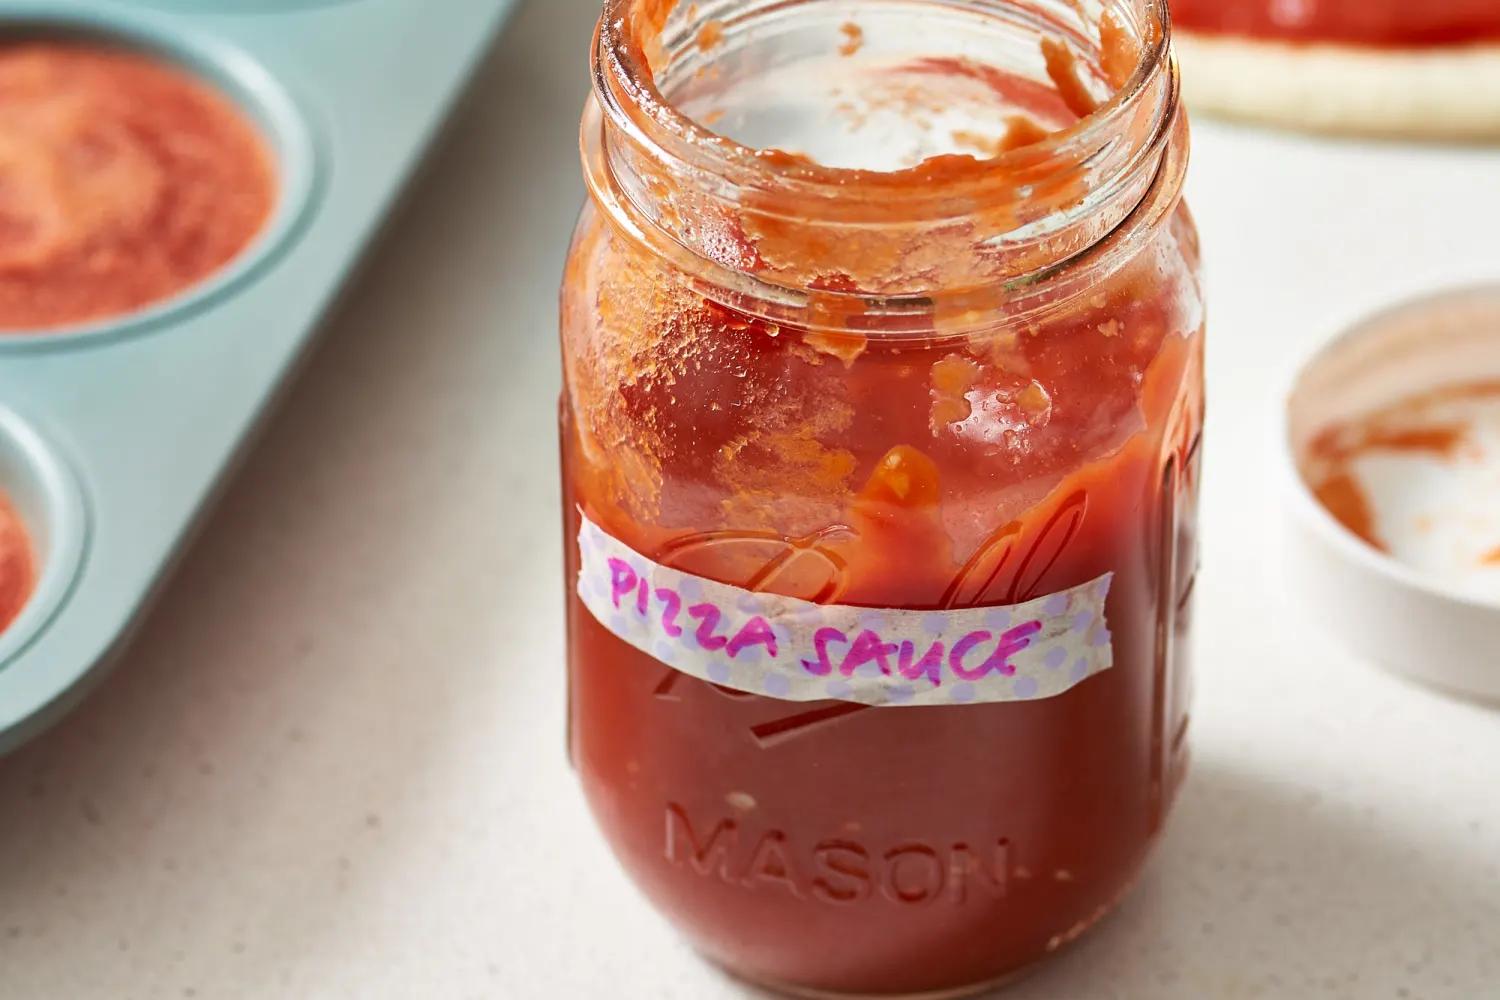 pizza sauce with tomato sauce - Should tomato sauce for pizza be cooked